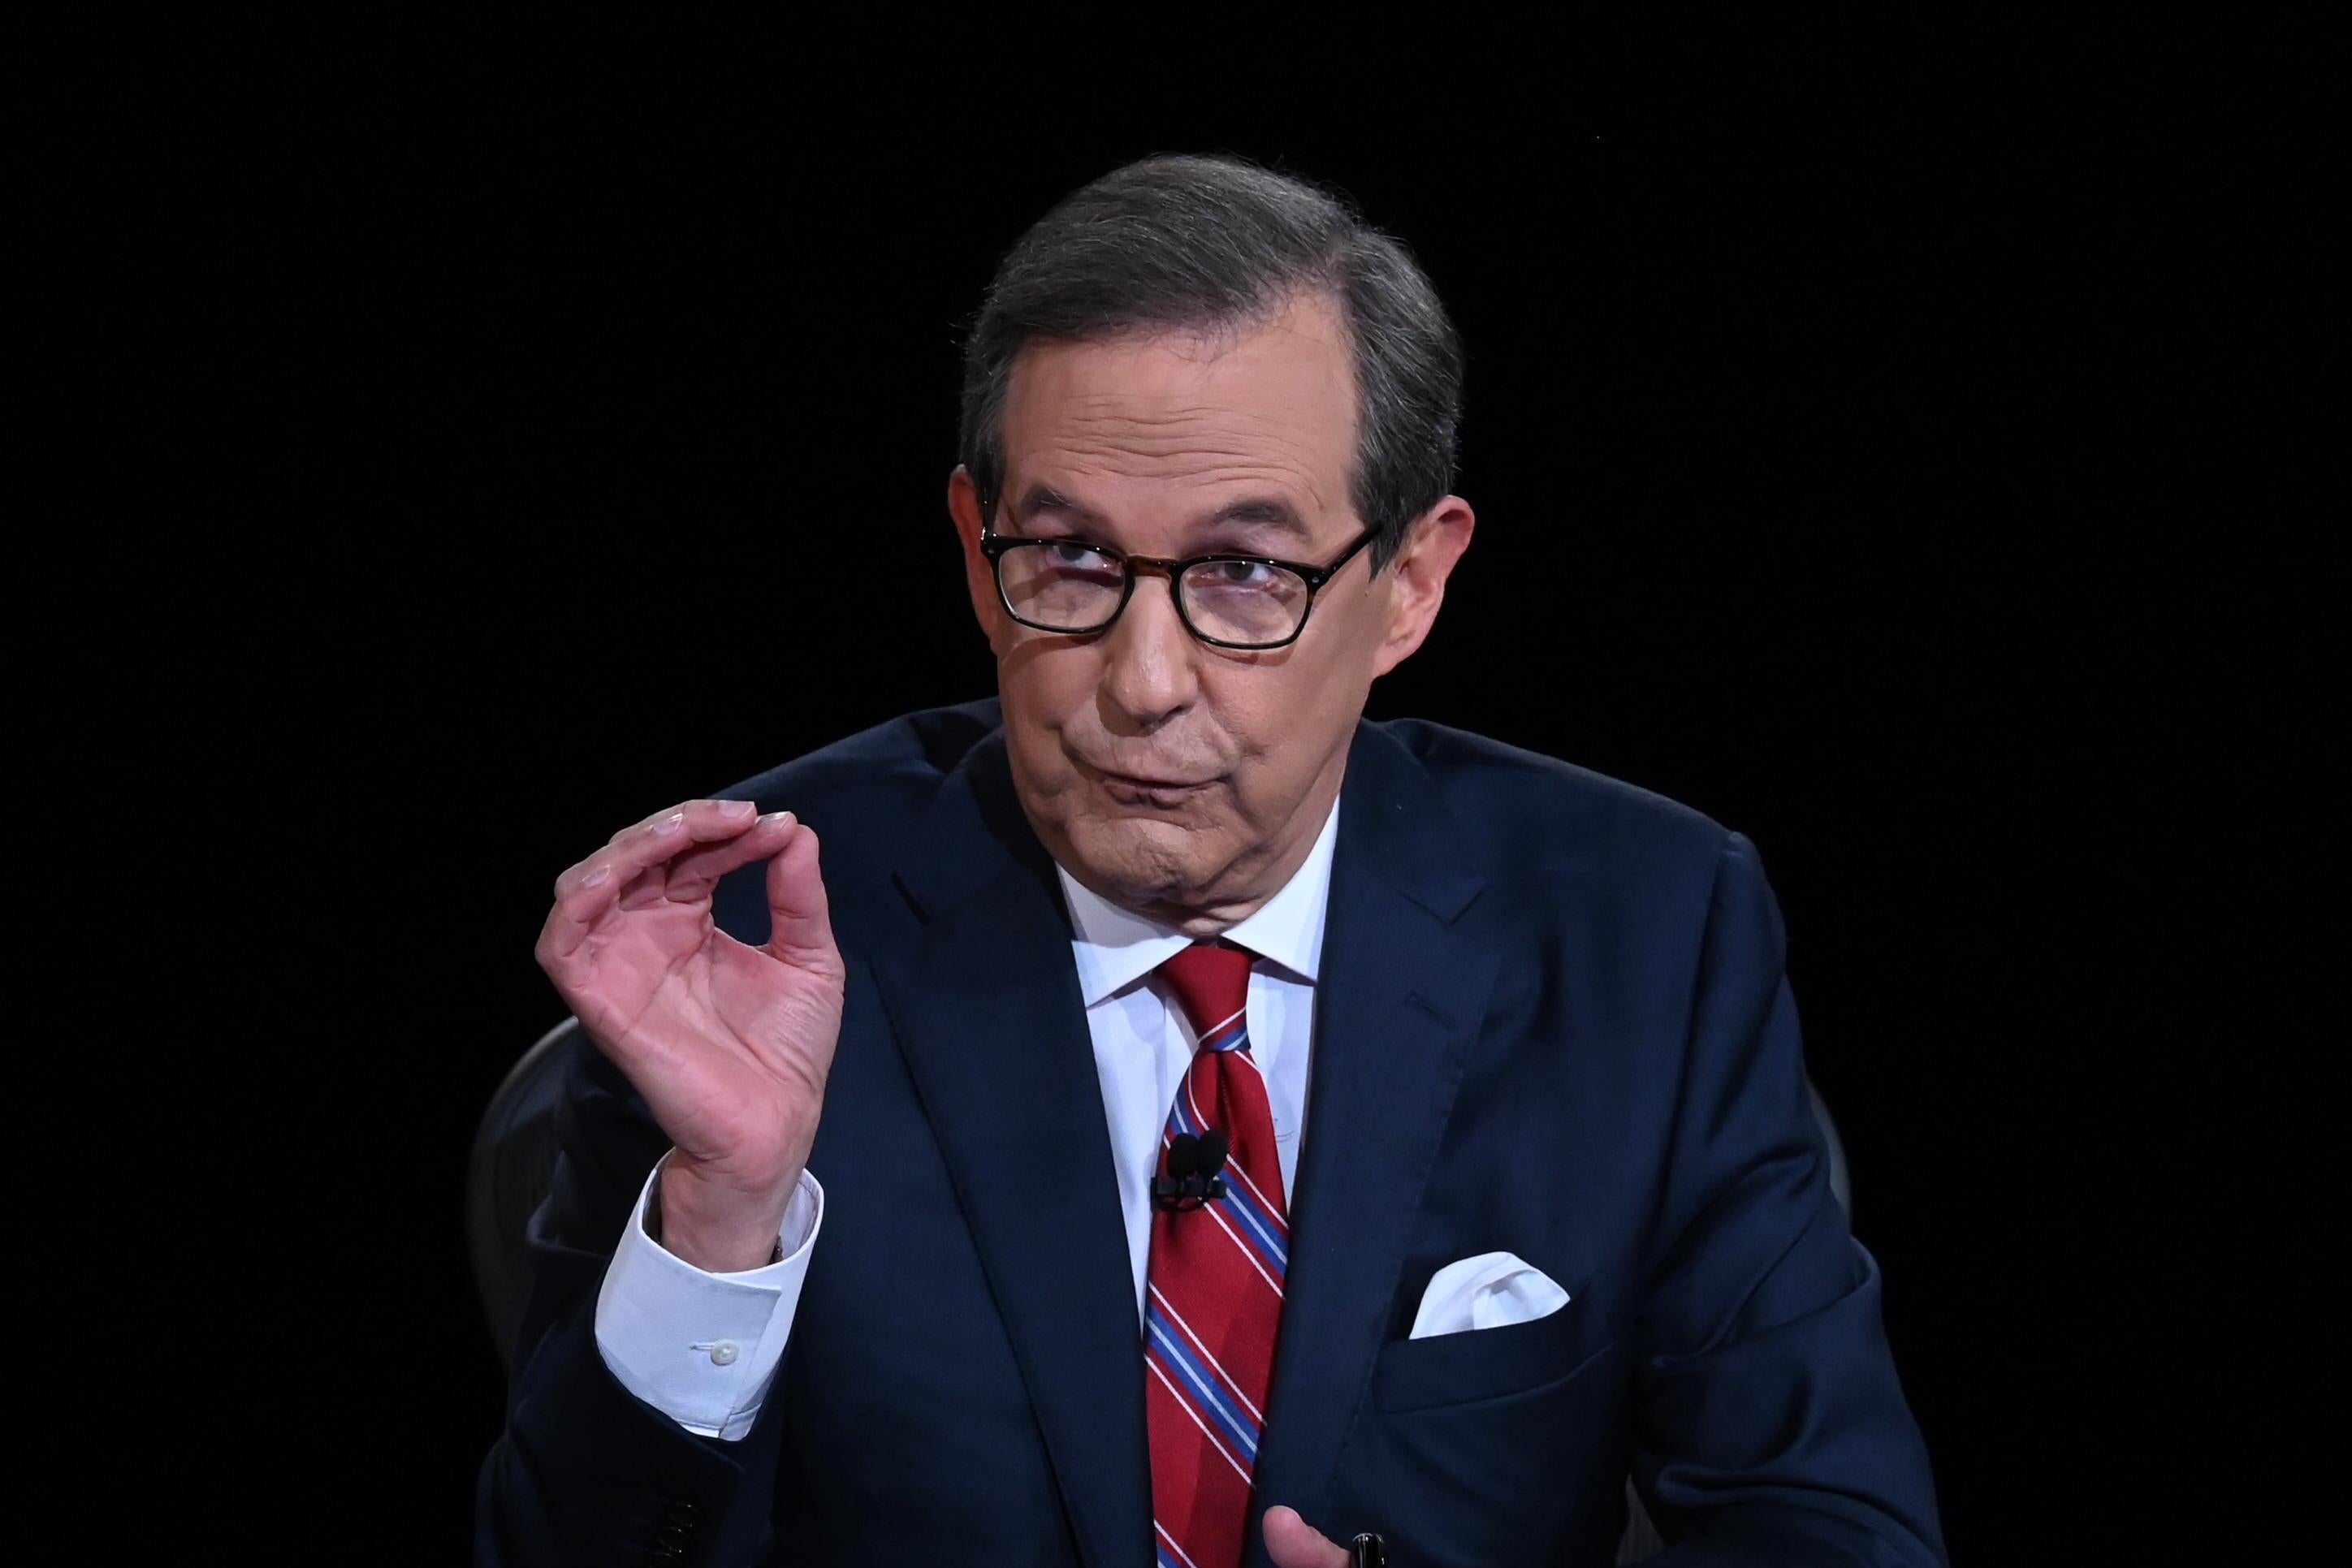 Chris Wallace seated and gesturing with one hand as he speaks